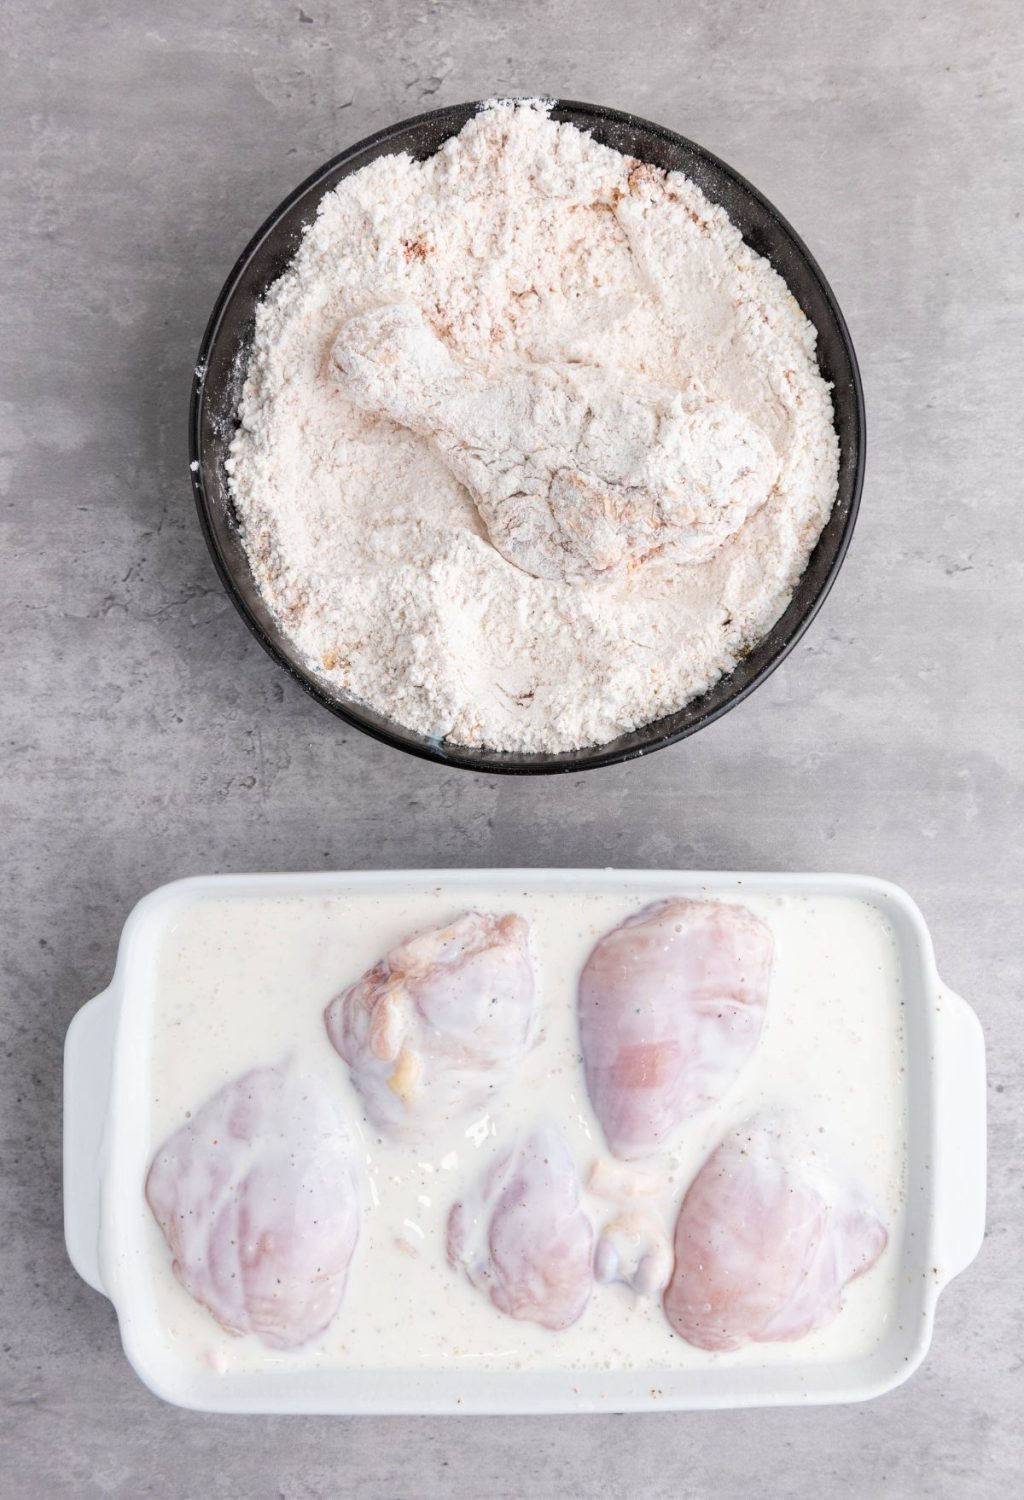 Chicken breasts in a baking dish next to a bowl of flour.